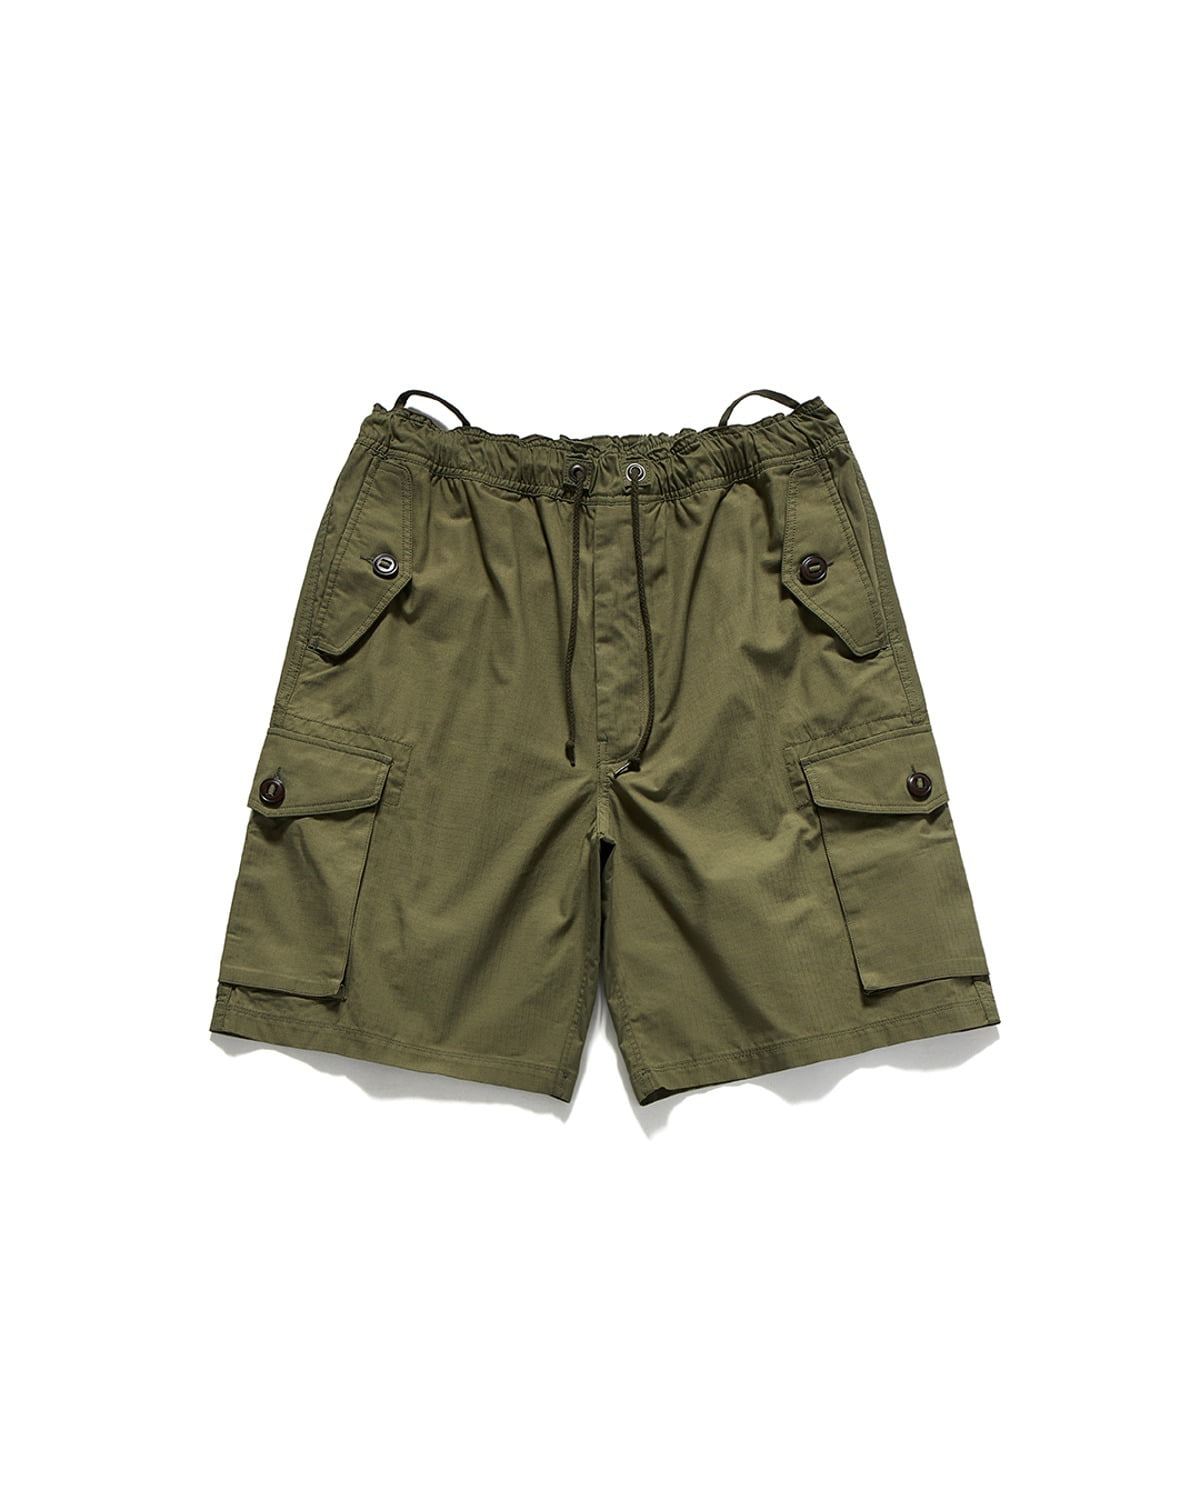 COMBAT EASY SHORTS / OLIVE RIPSTOP